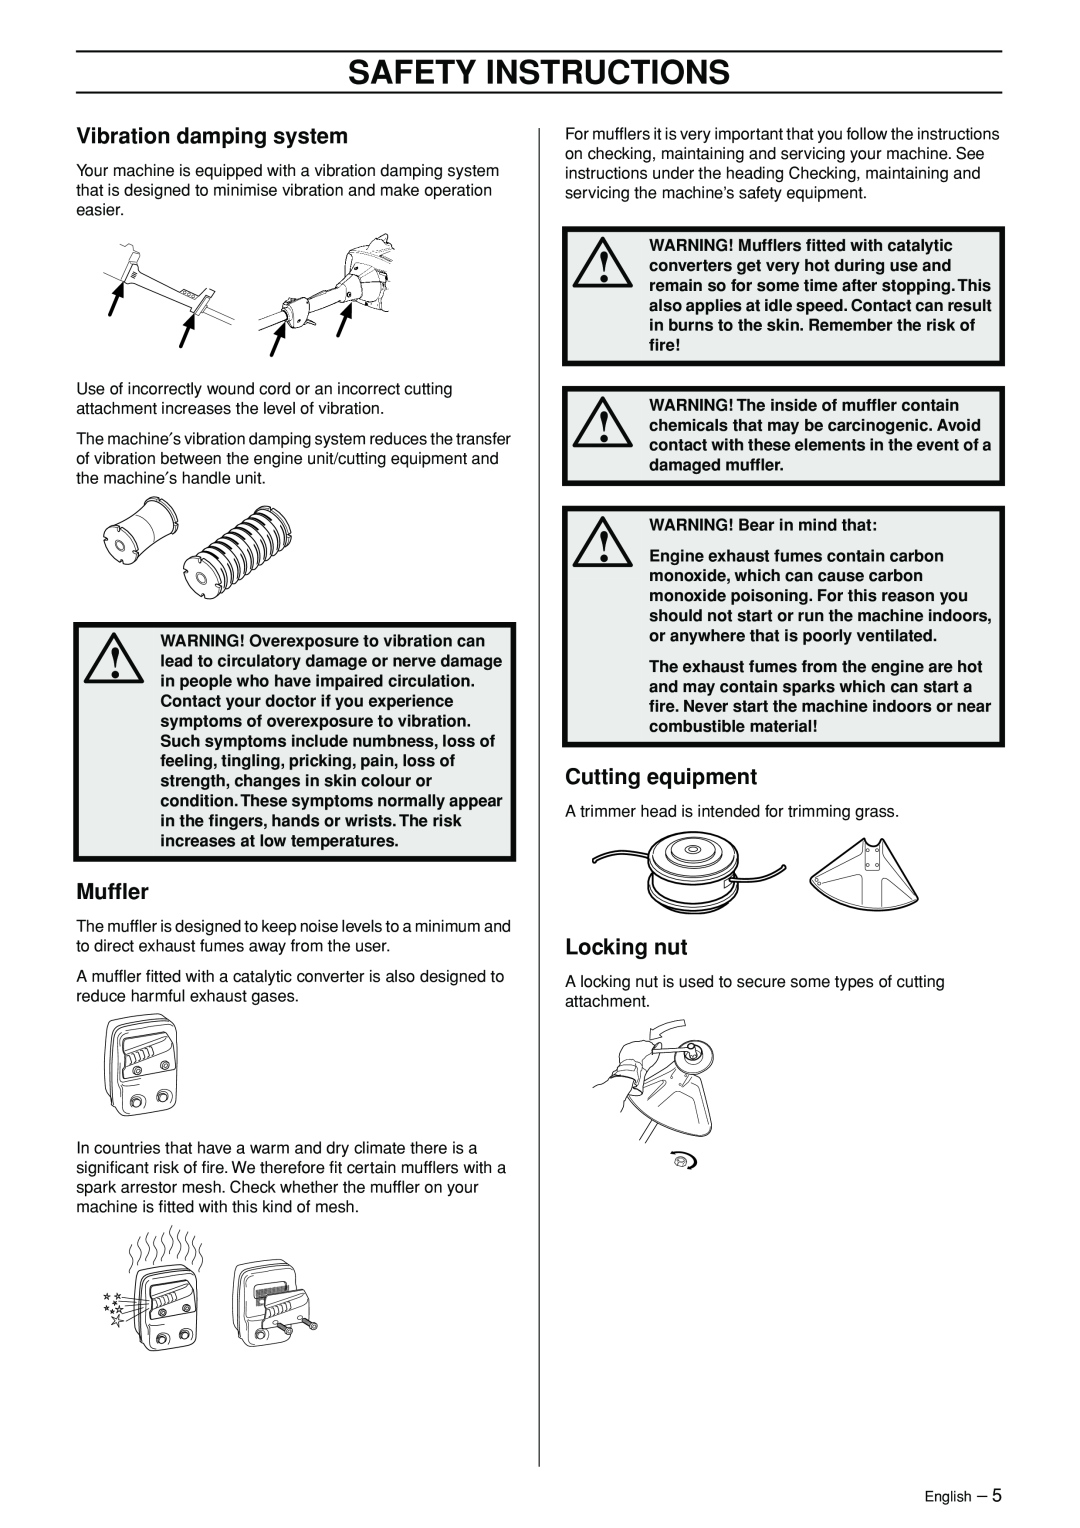 Husqvarna 326L manual Safety Instructions, WARNING! Overexposure to vibration can, WARNING! Mufﬂers ﬁtted with catalytic 